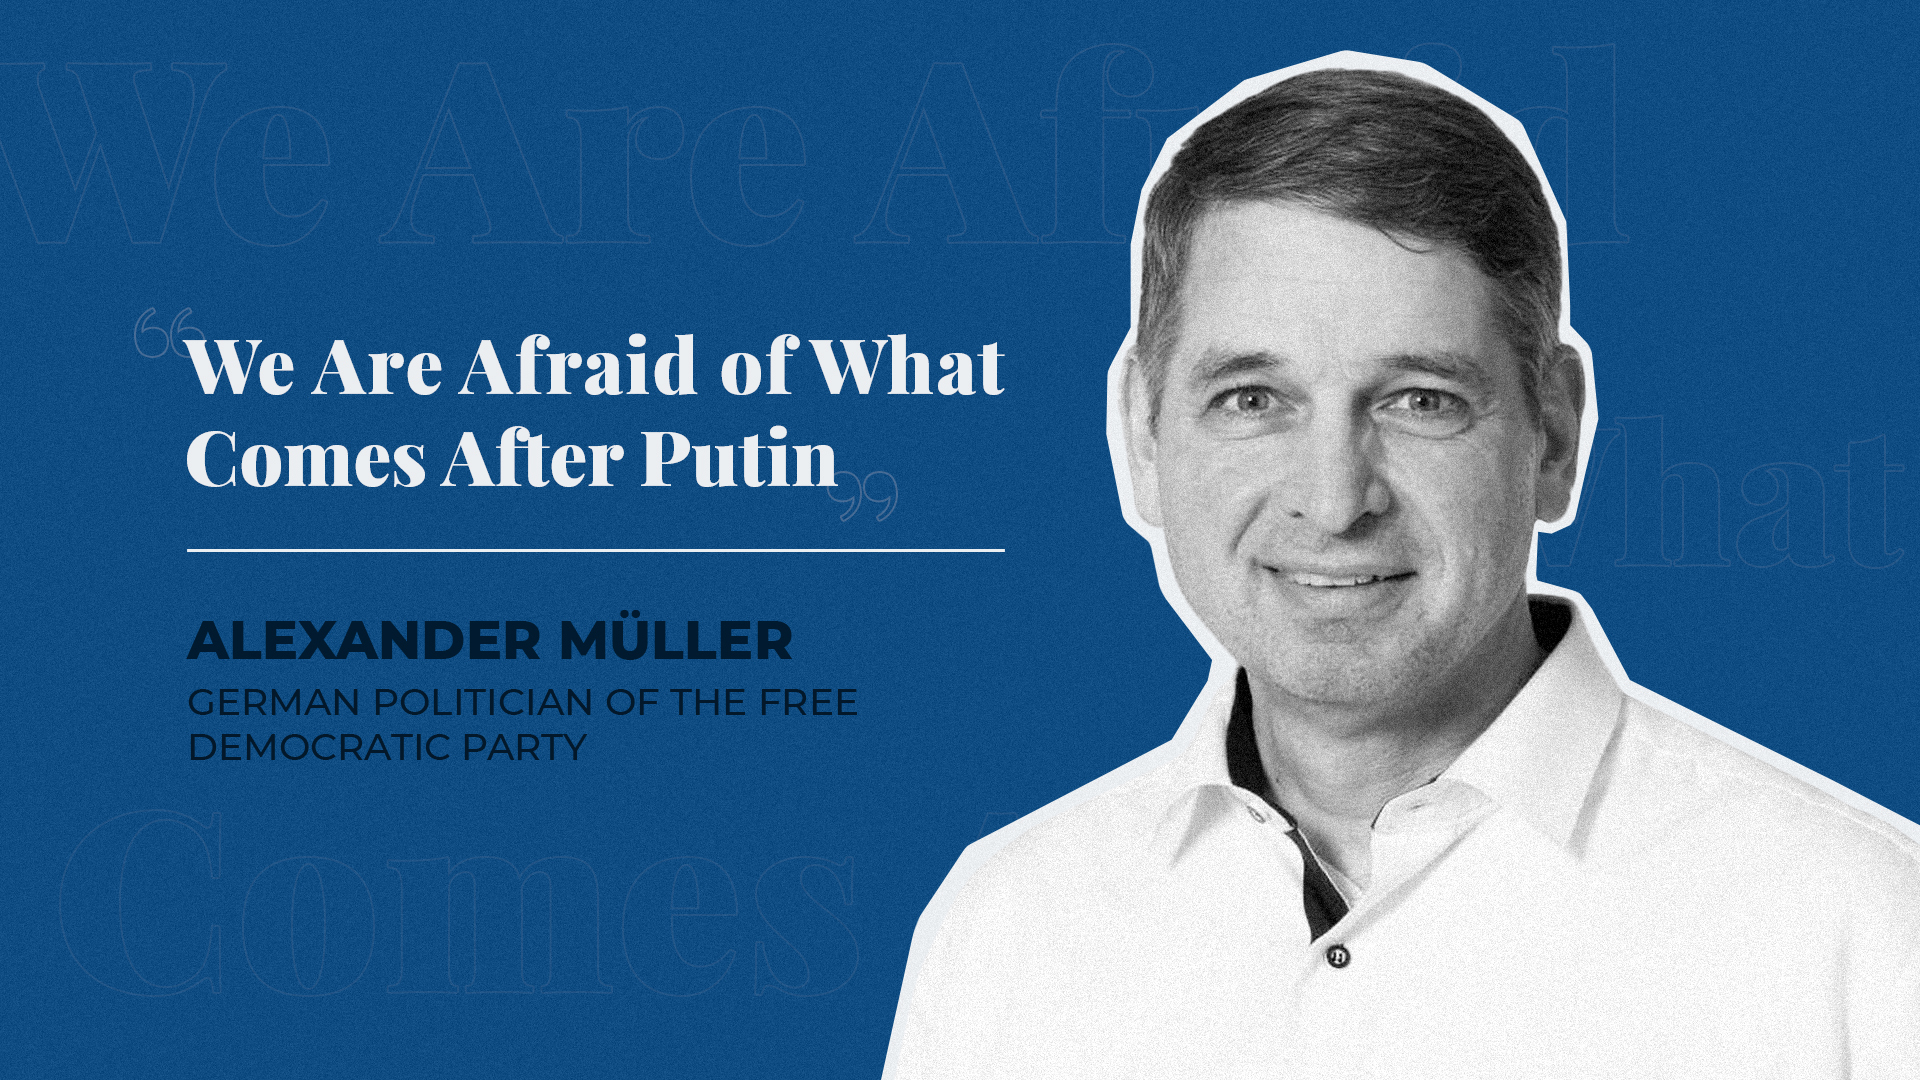 ‘We Are Afraid of What Comes After Putin’ -  An Interview with German Politician Müller